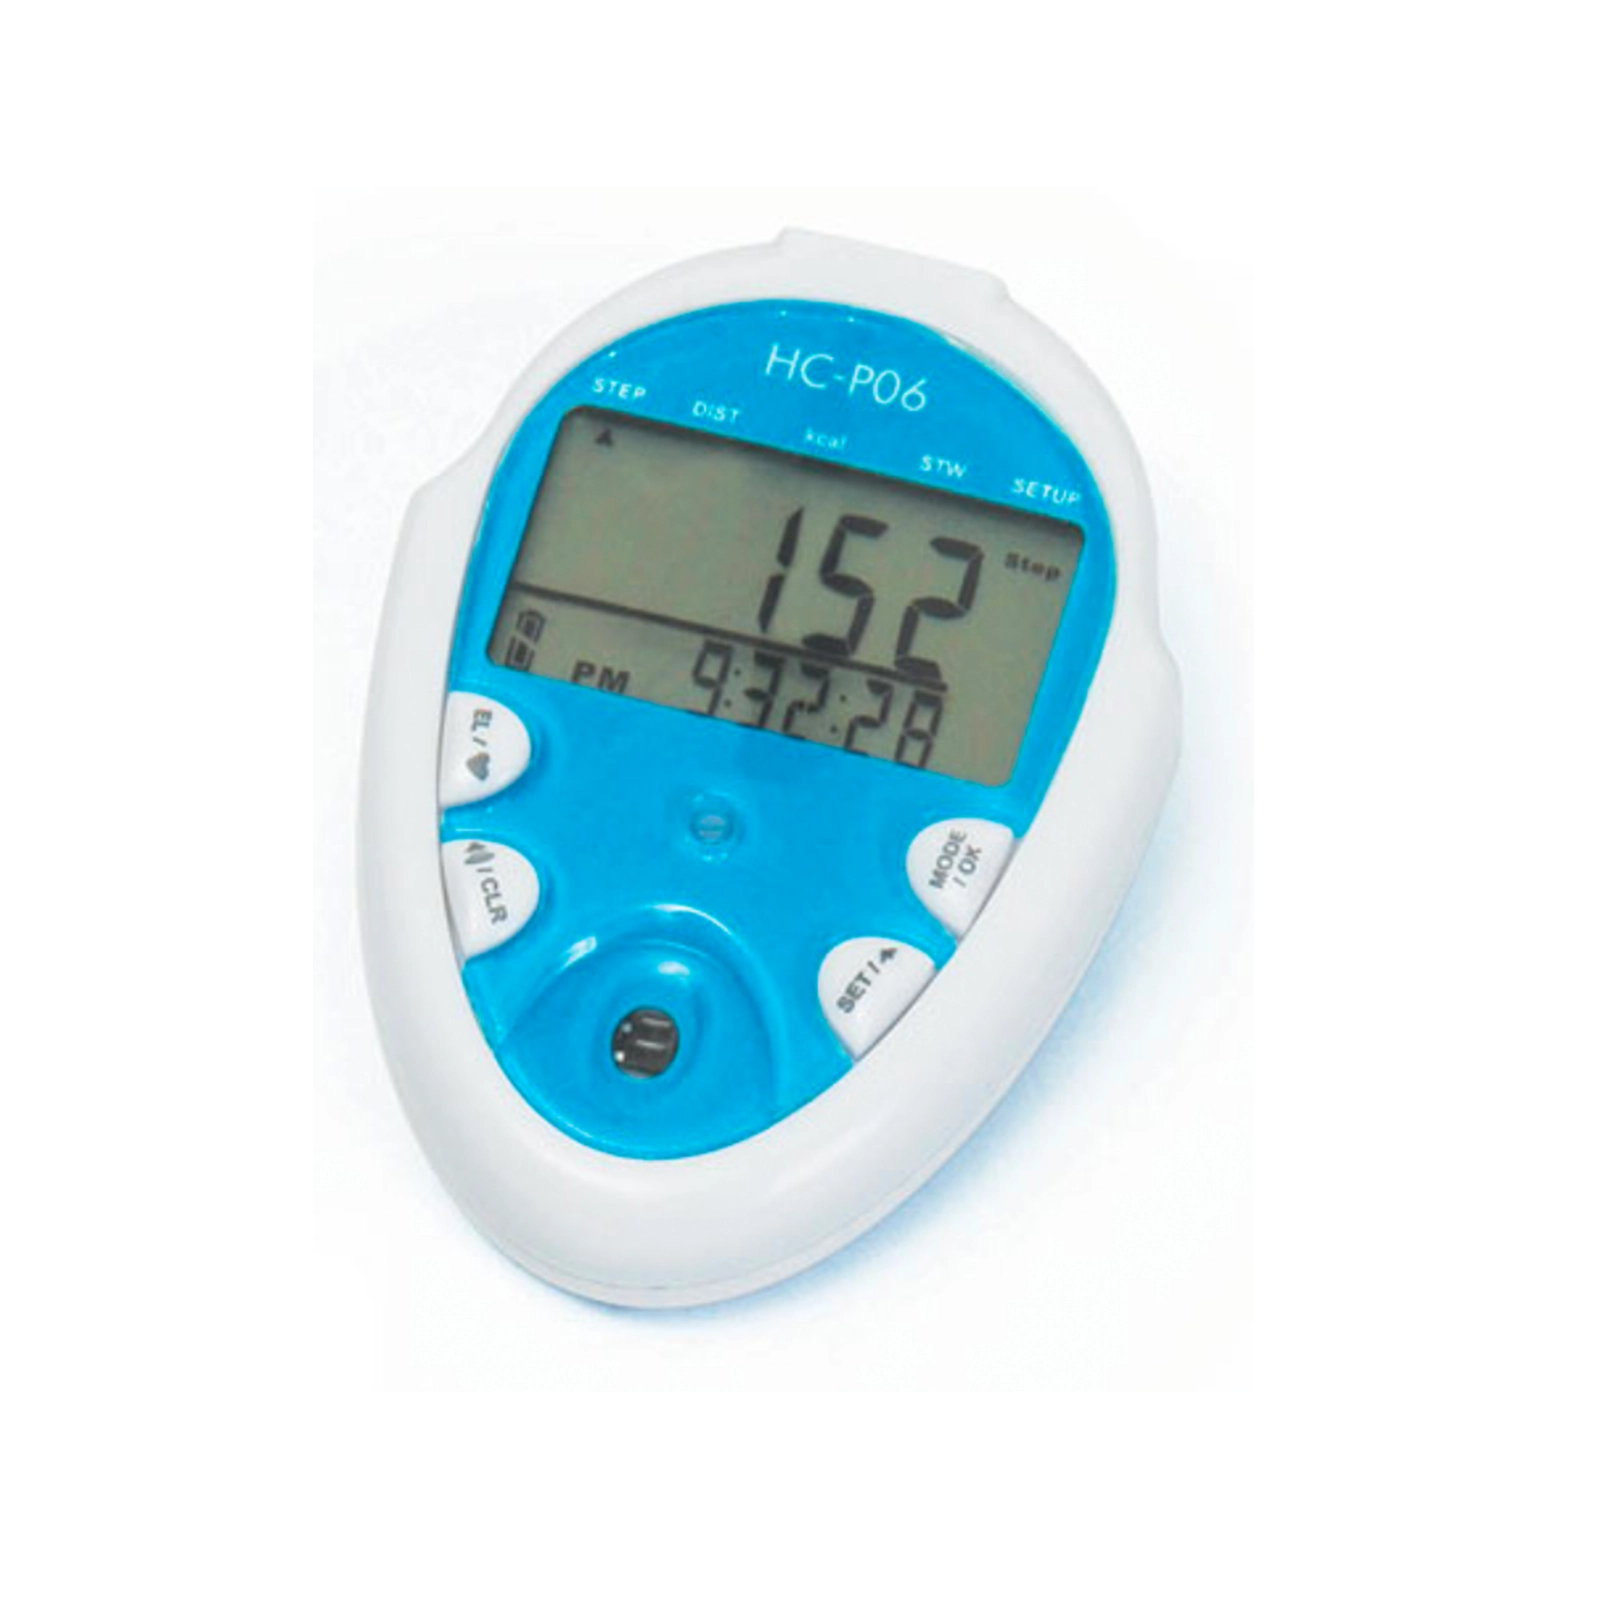 Talking Pedometer with Pulse Rate Measurement